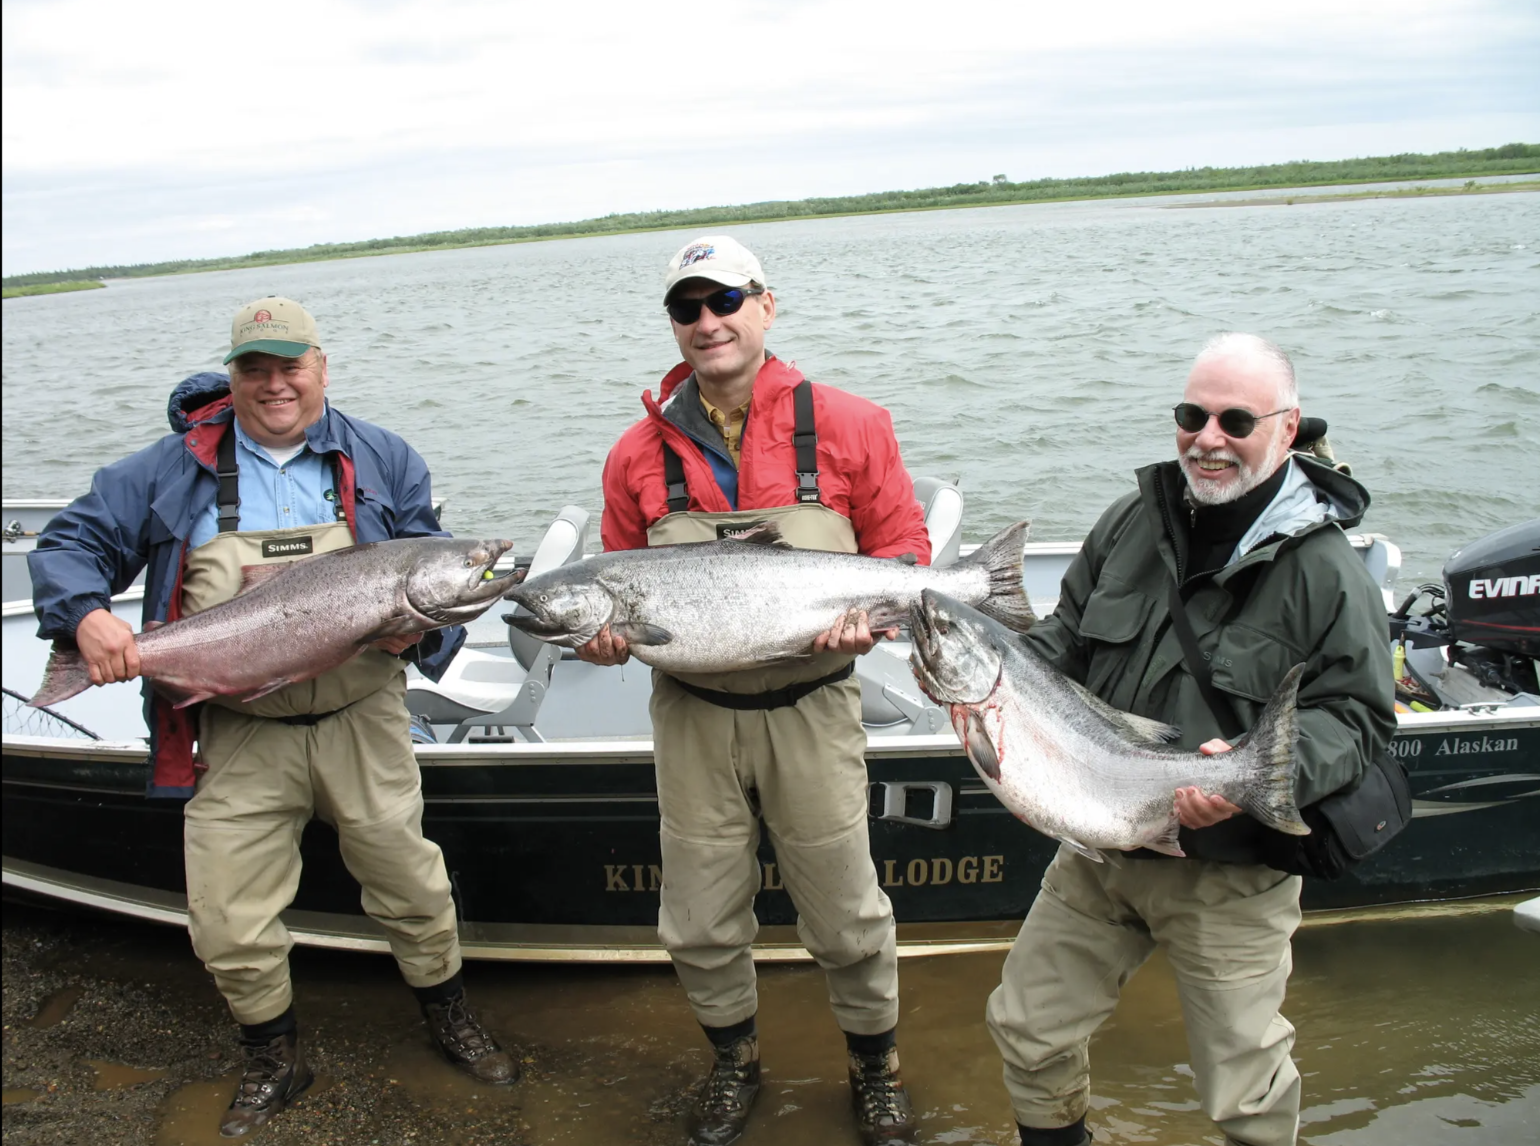 Supreme Court Justice Samuel Alito, center, and hedge fund billionaire Paul Singer, right, hold king salmon with another guest (via Propublica)